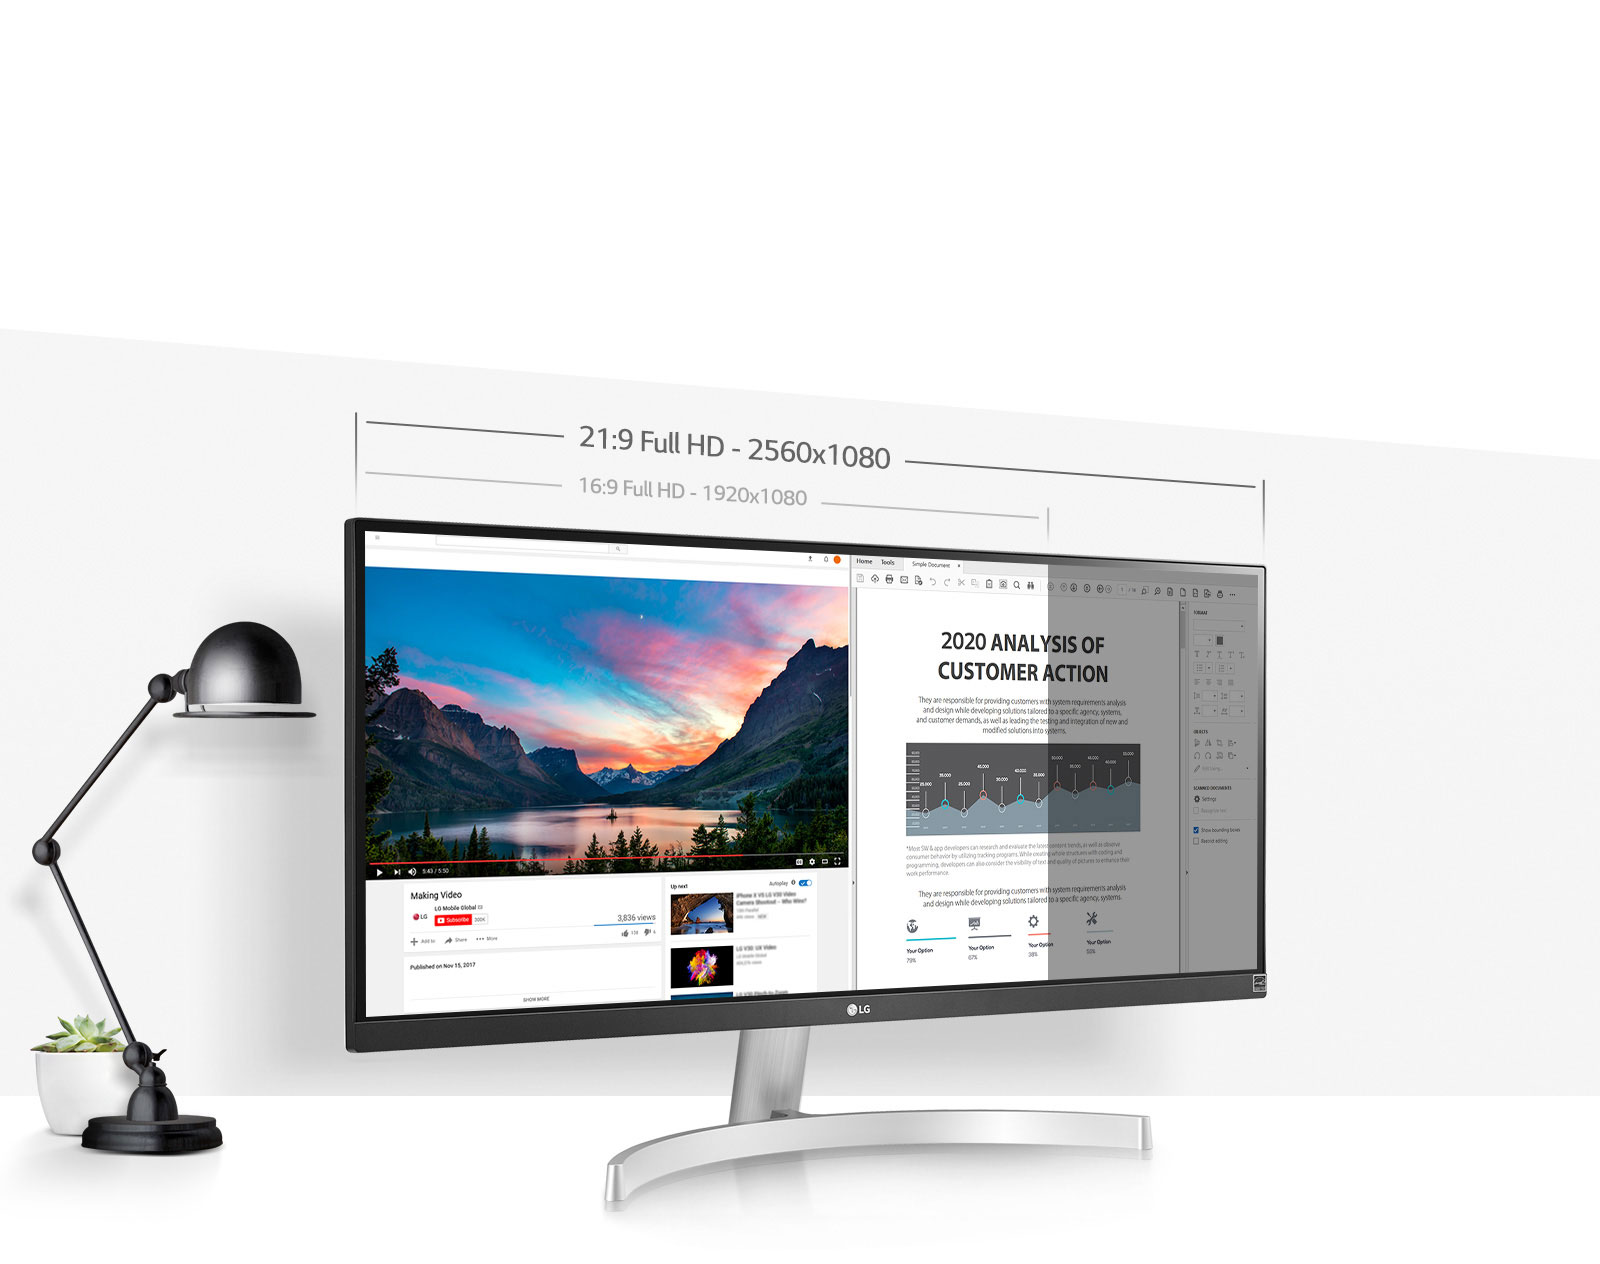 29 inch UltraWide™ Full HD (2560x1080) Display provides 33% more screen space than 16:9 Full HD resolution display.